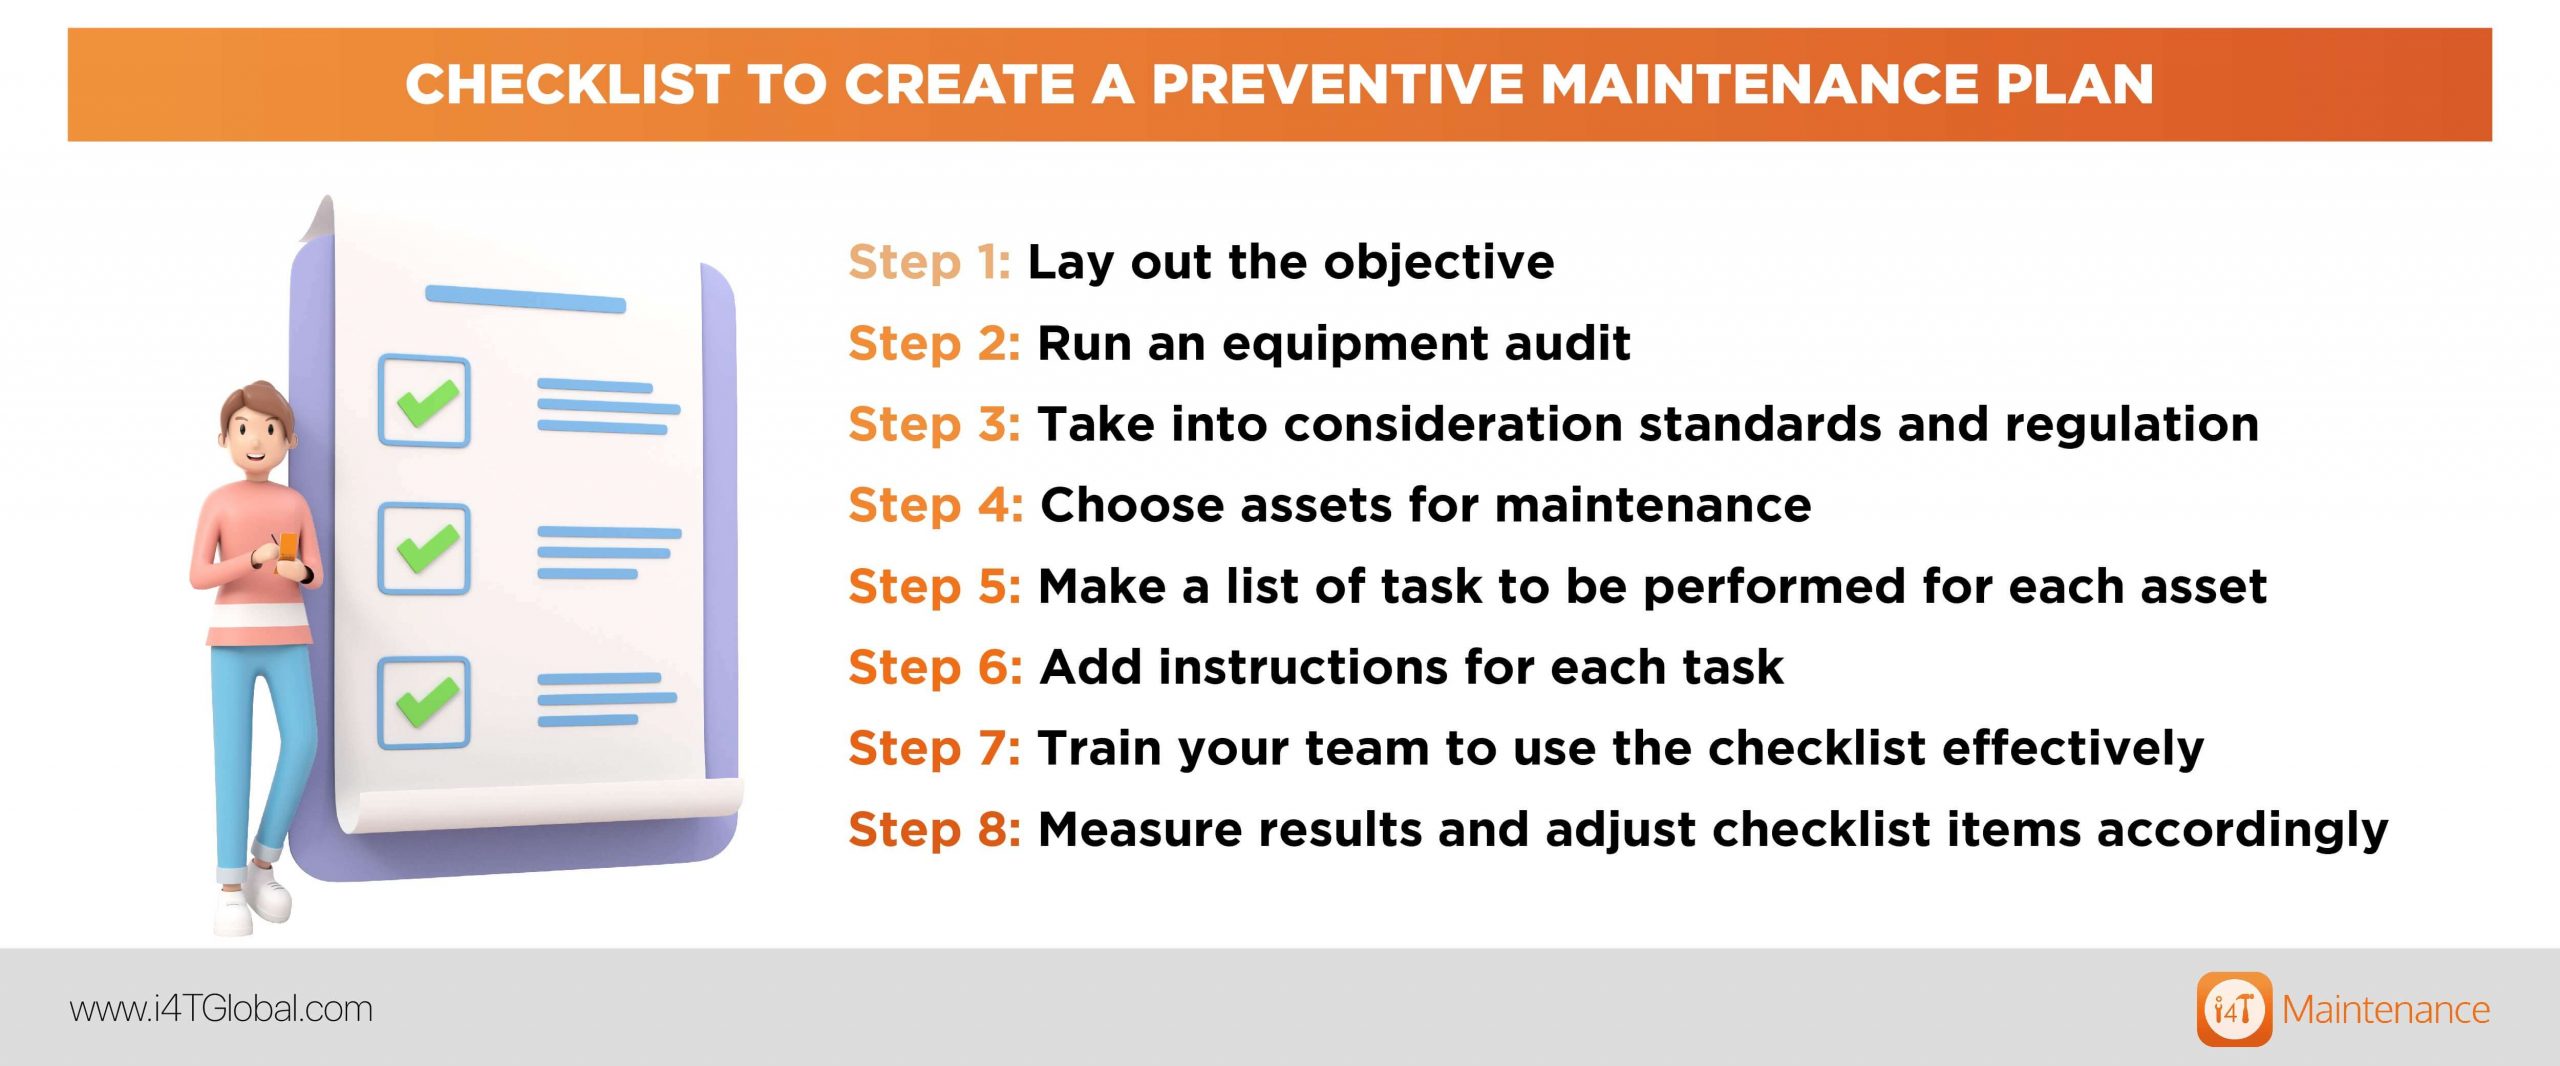 checklist for creating a preventive maintenance plan - i4T Global